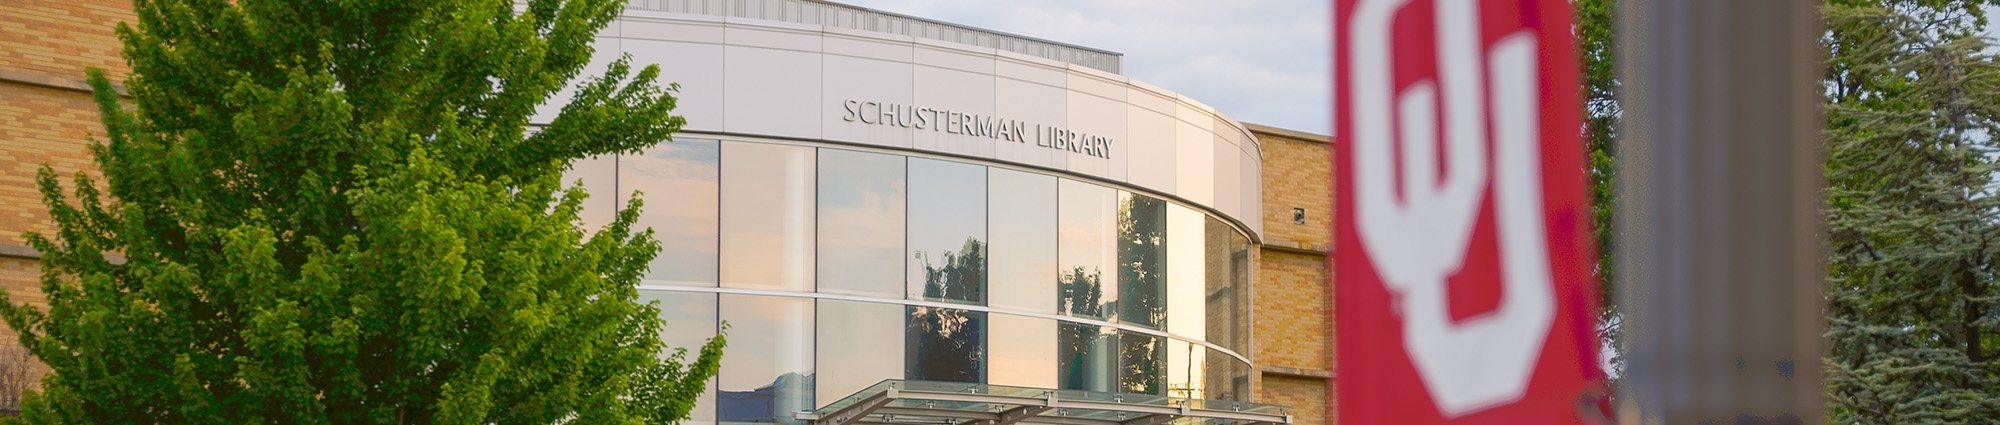 The entrance to the Schusterman Library, with large, picture windows and an OU flag in the foreground